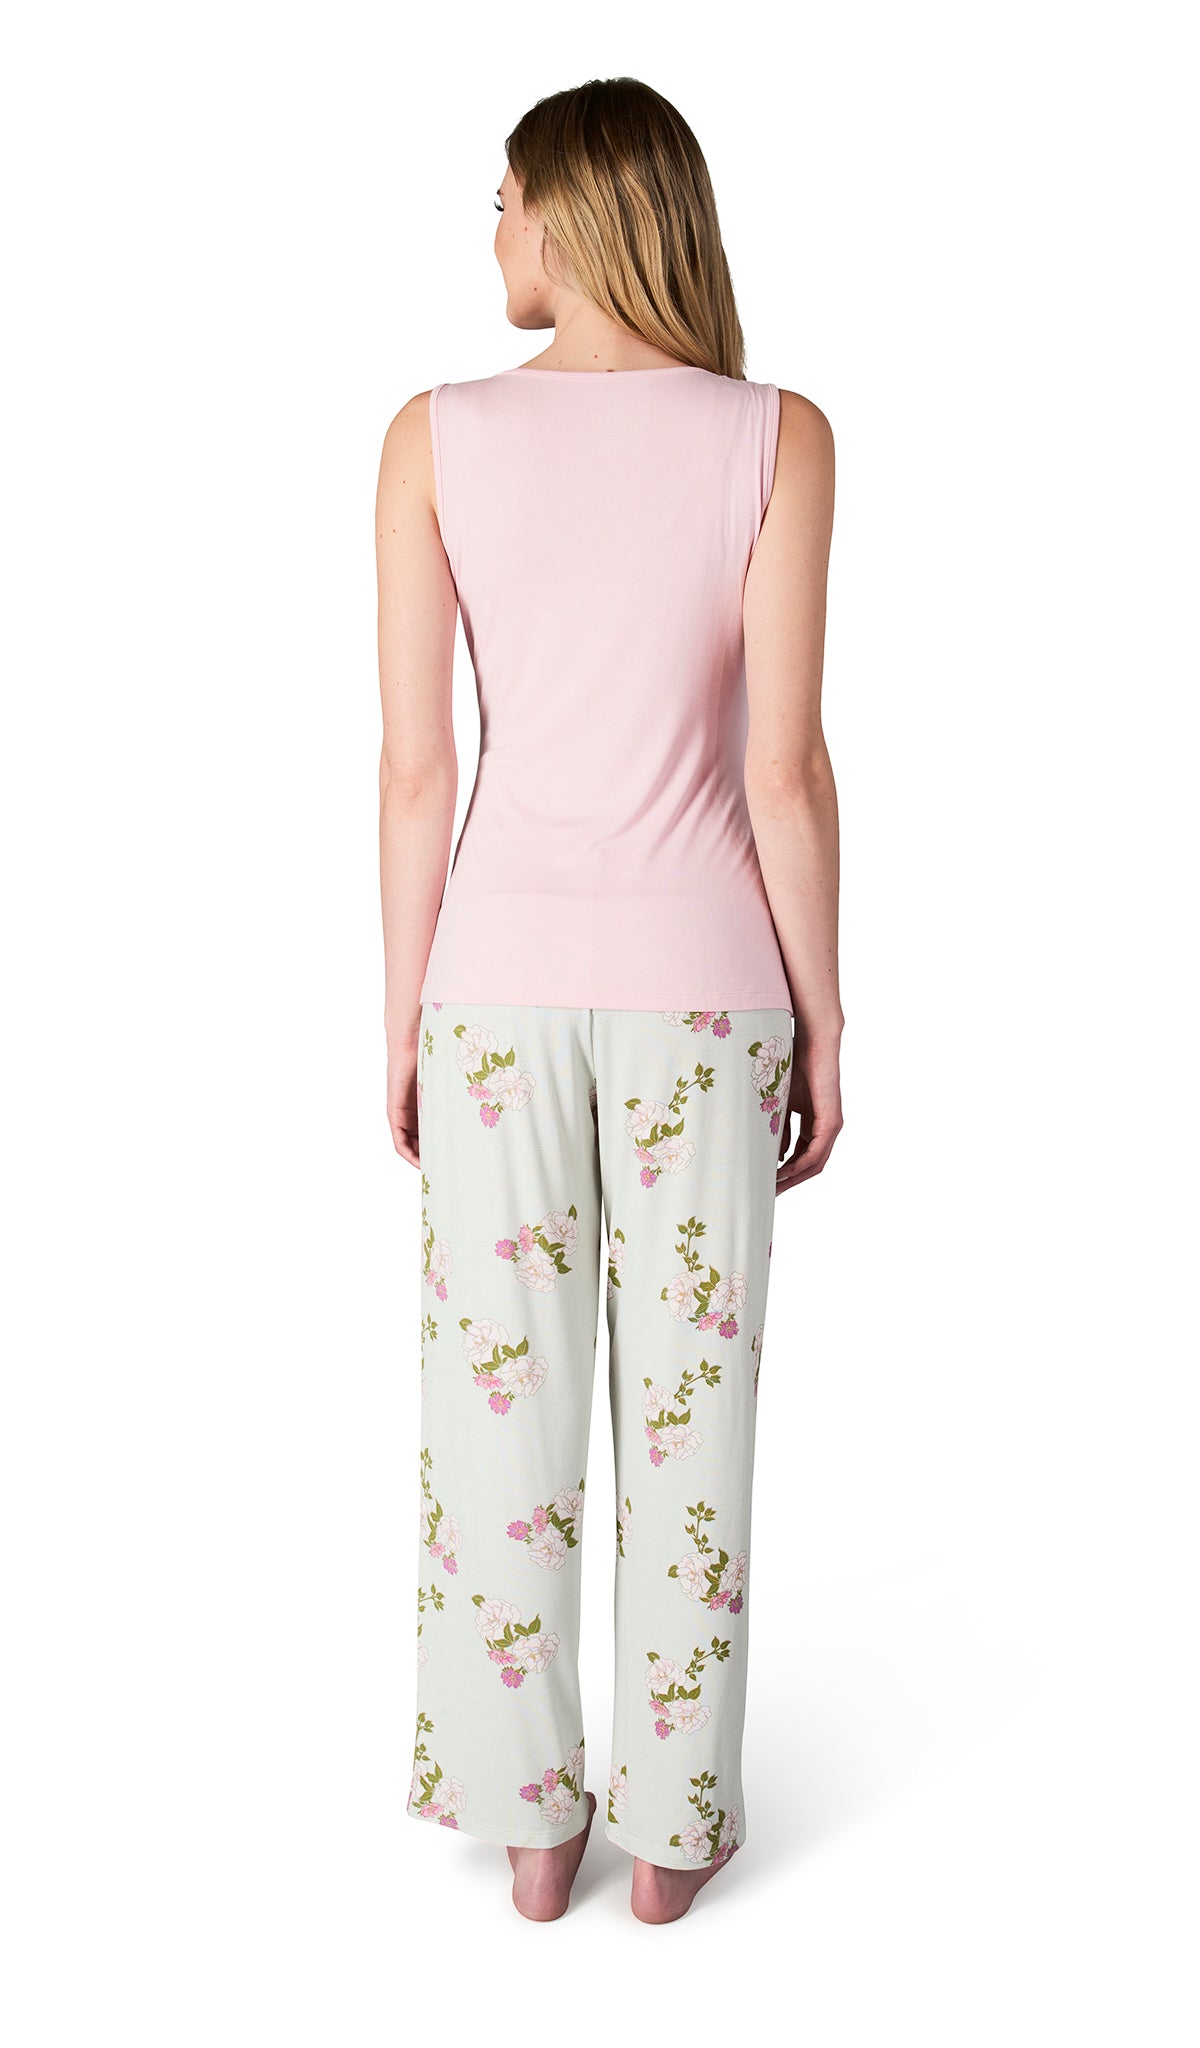 Peony Analise 3-Piece Set, back shot of woman wearing tank top and pant.